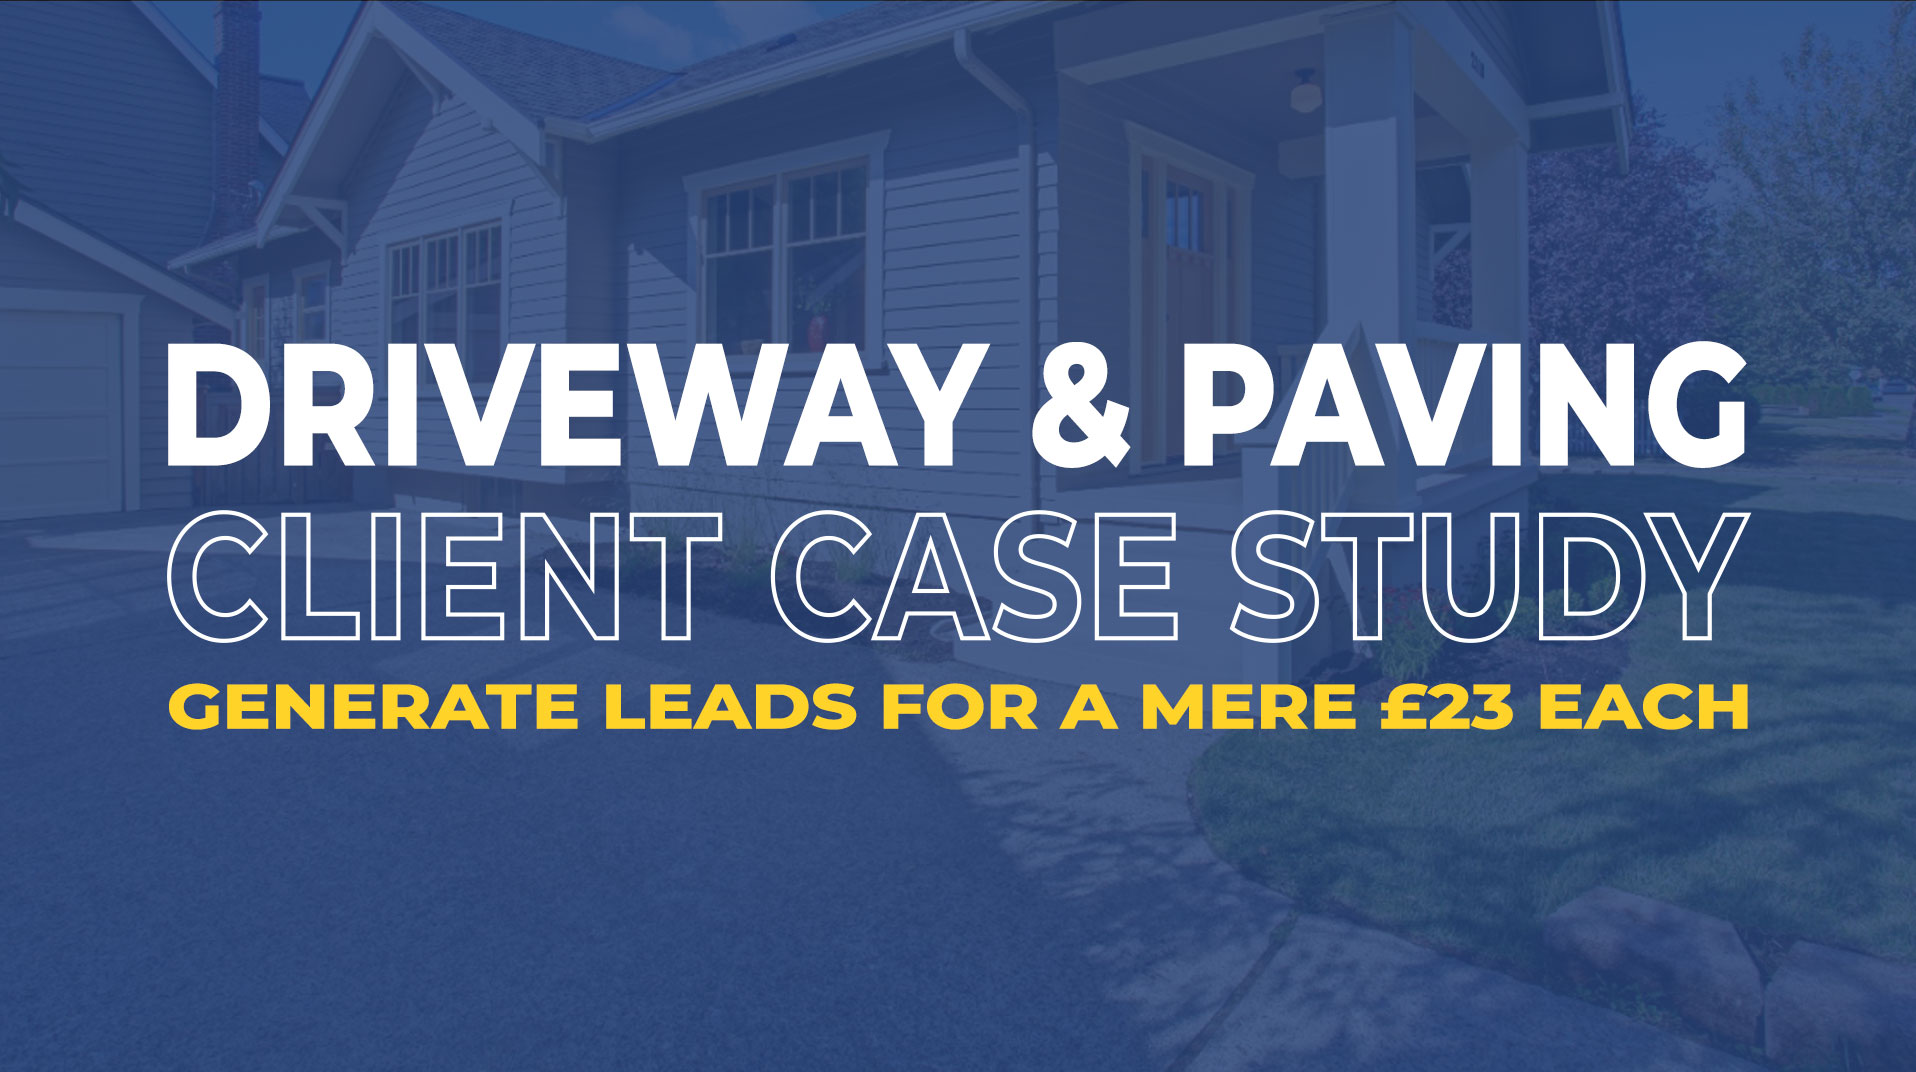 Case Study: Driveway and Paving Company